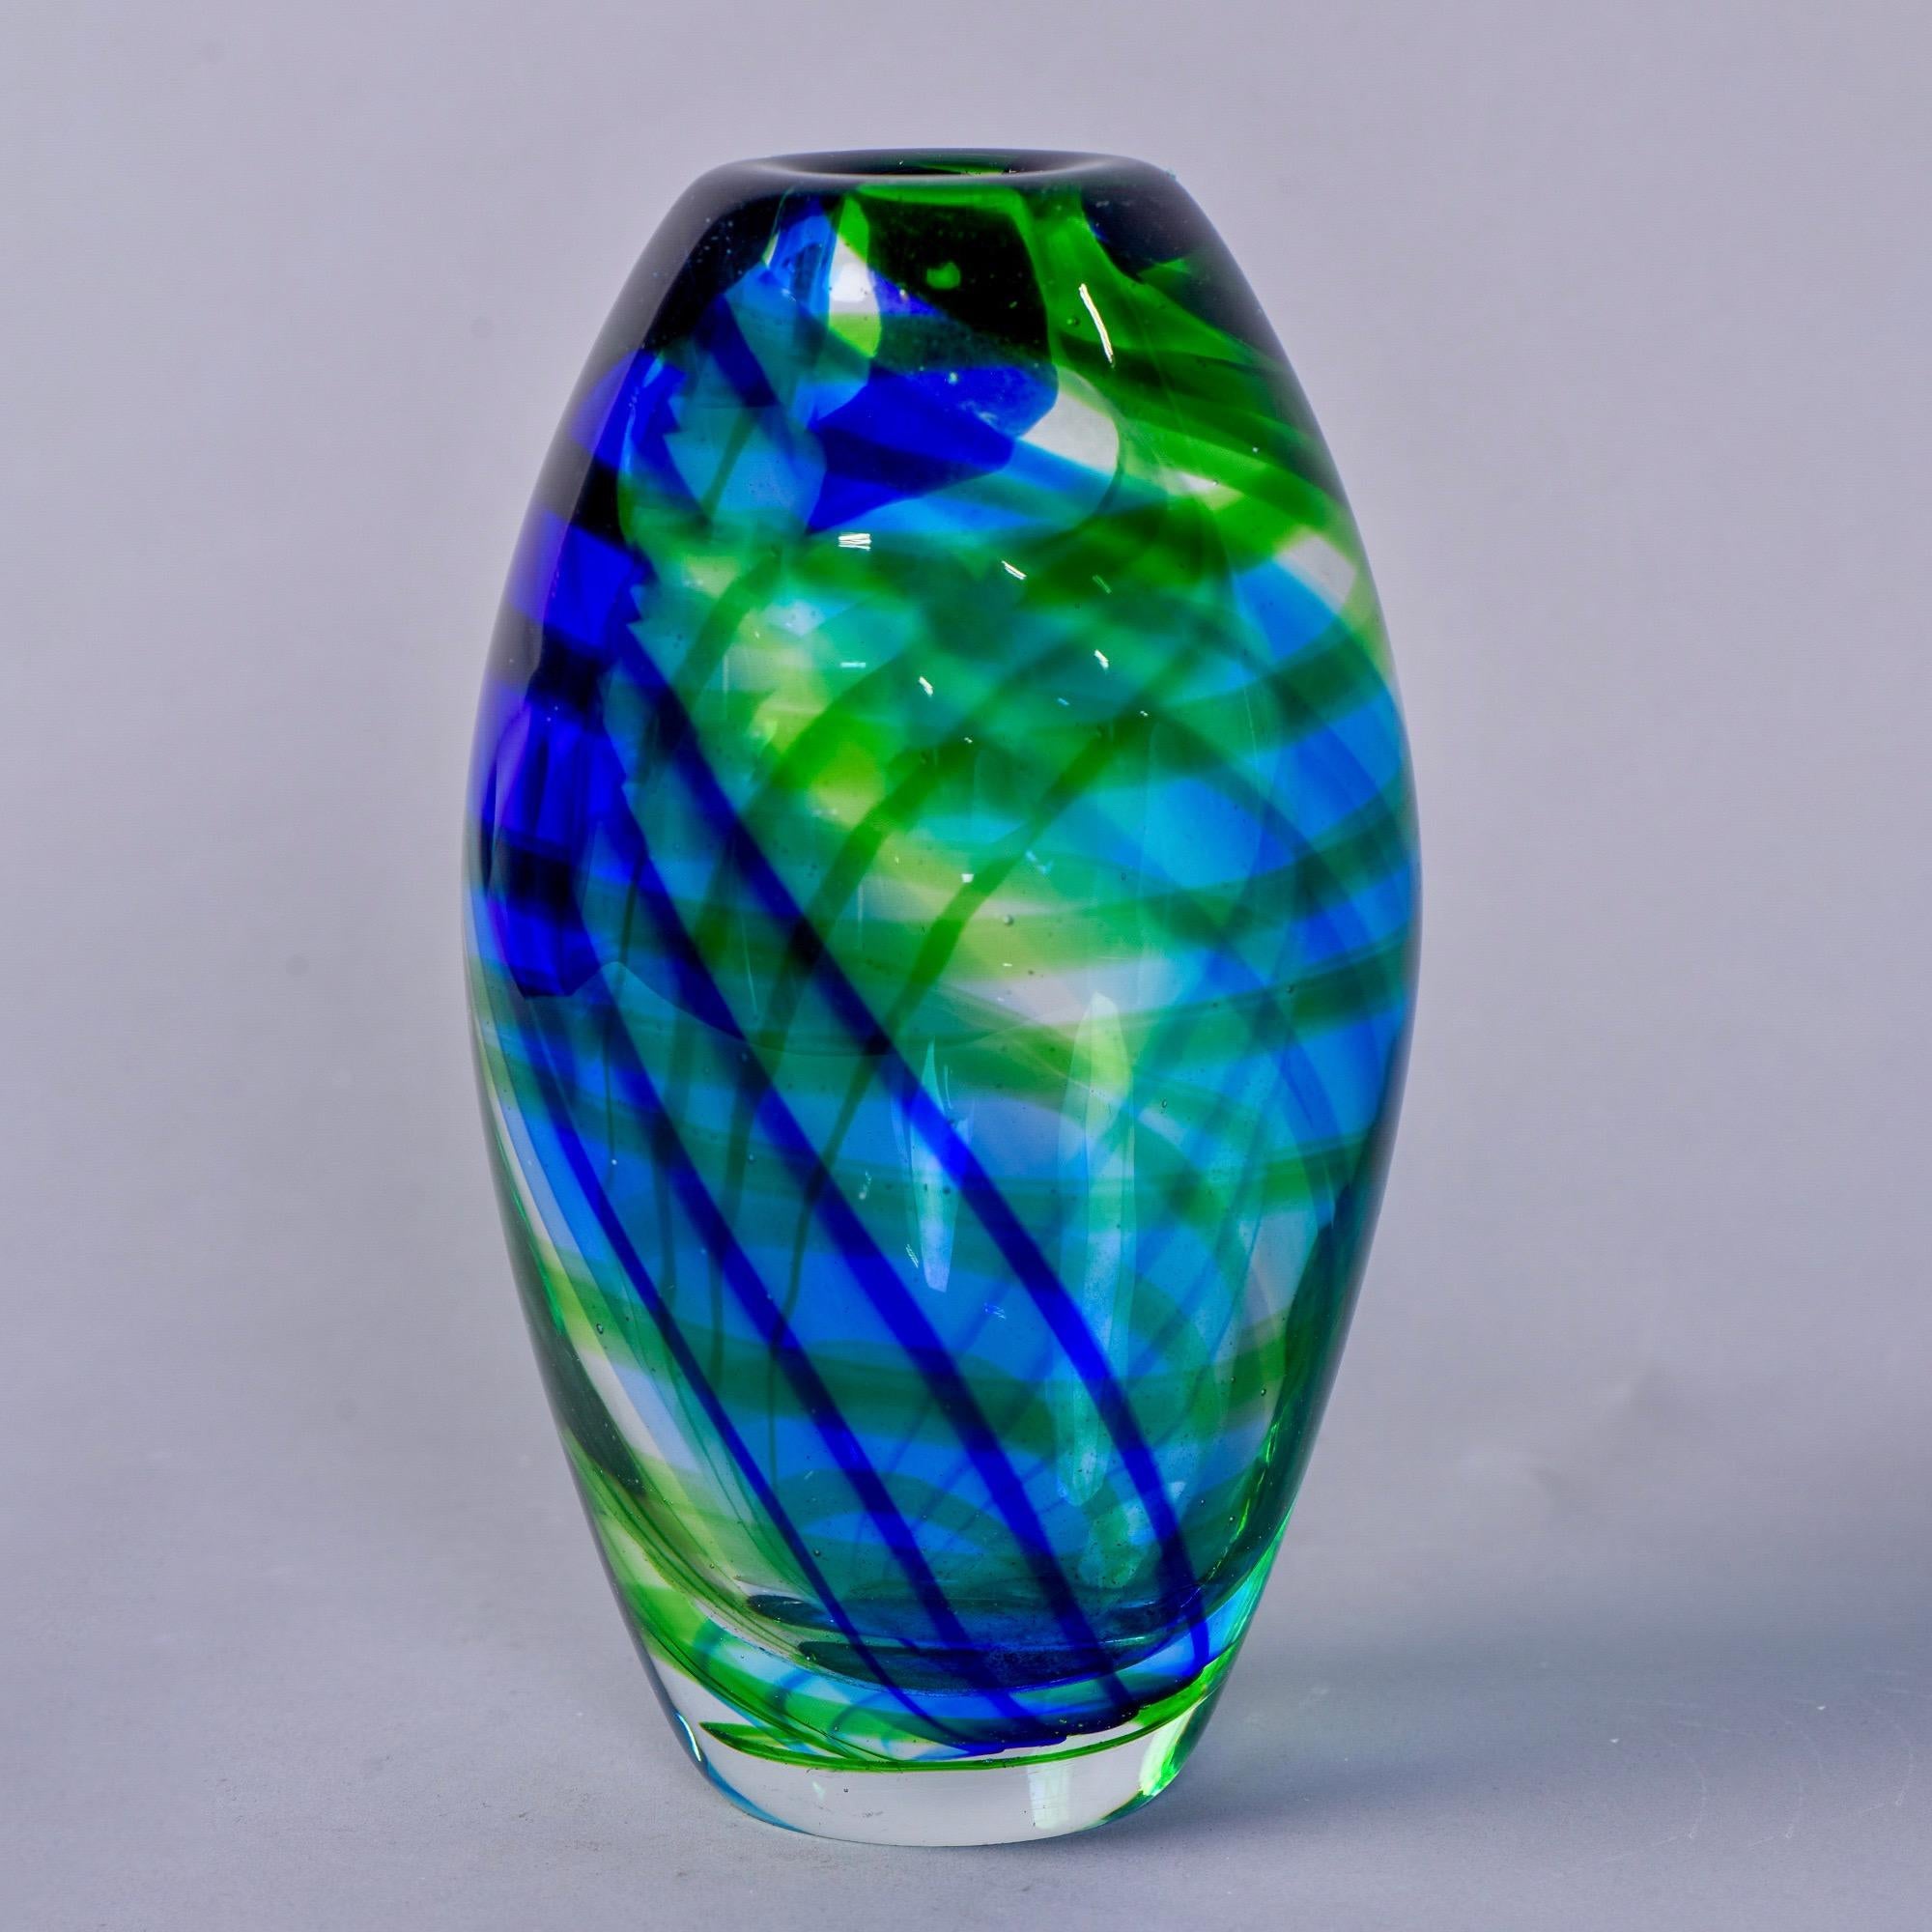 Modern Murano glass vase in heavy clear cased glass with wide, diagonal bands of sheer blue and green. Unknown Murano maker.